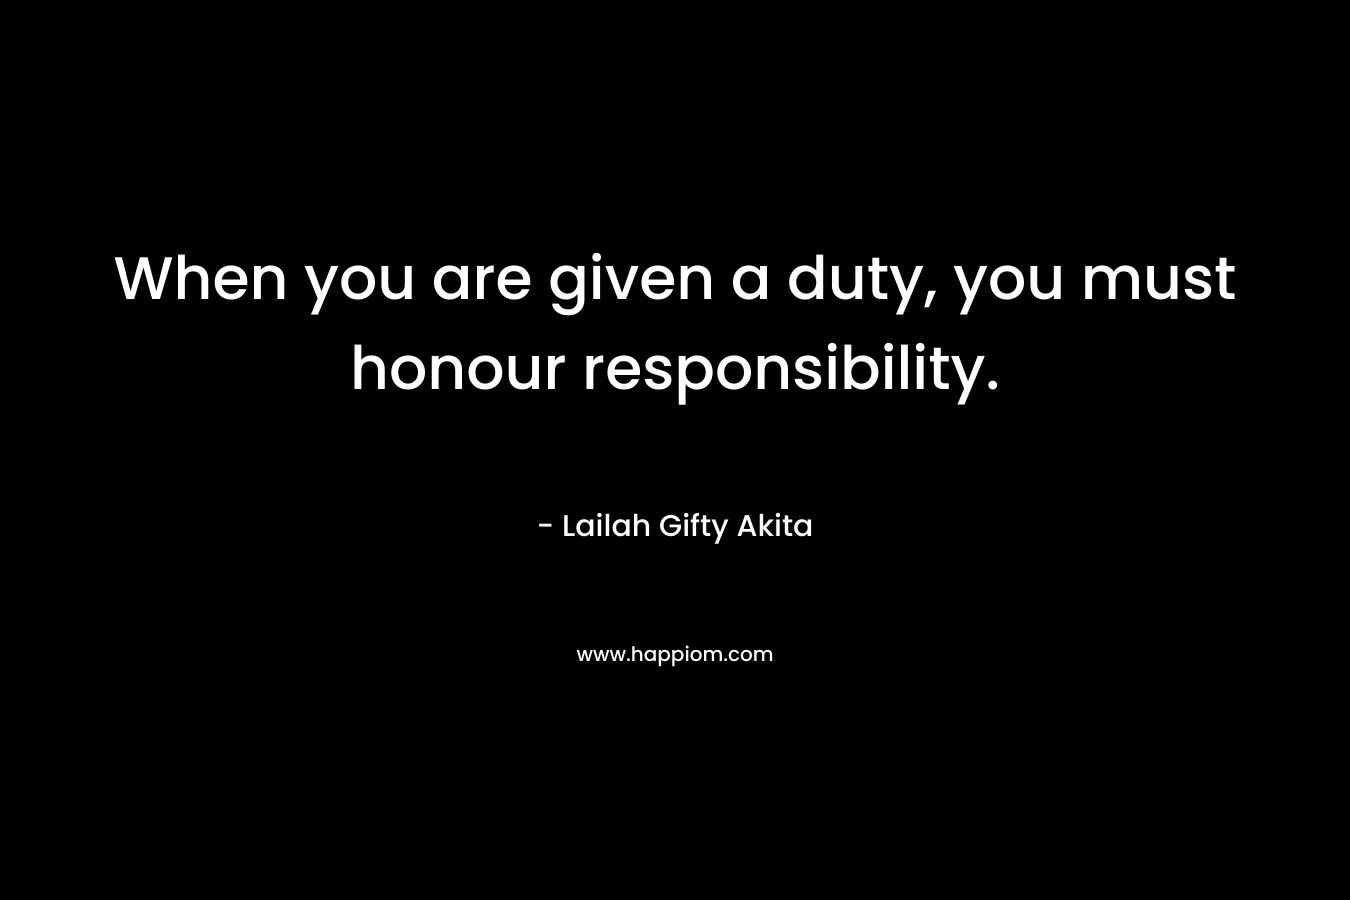 When you are given a duty, you must honour responsibility. – Lailah Gifty Akita